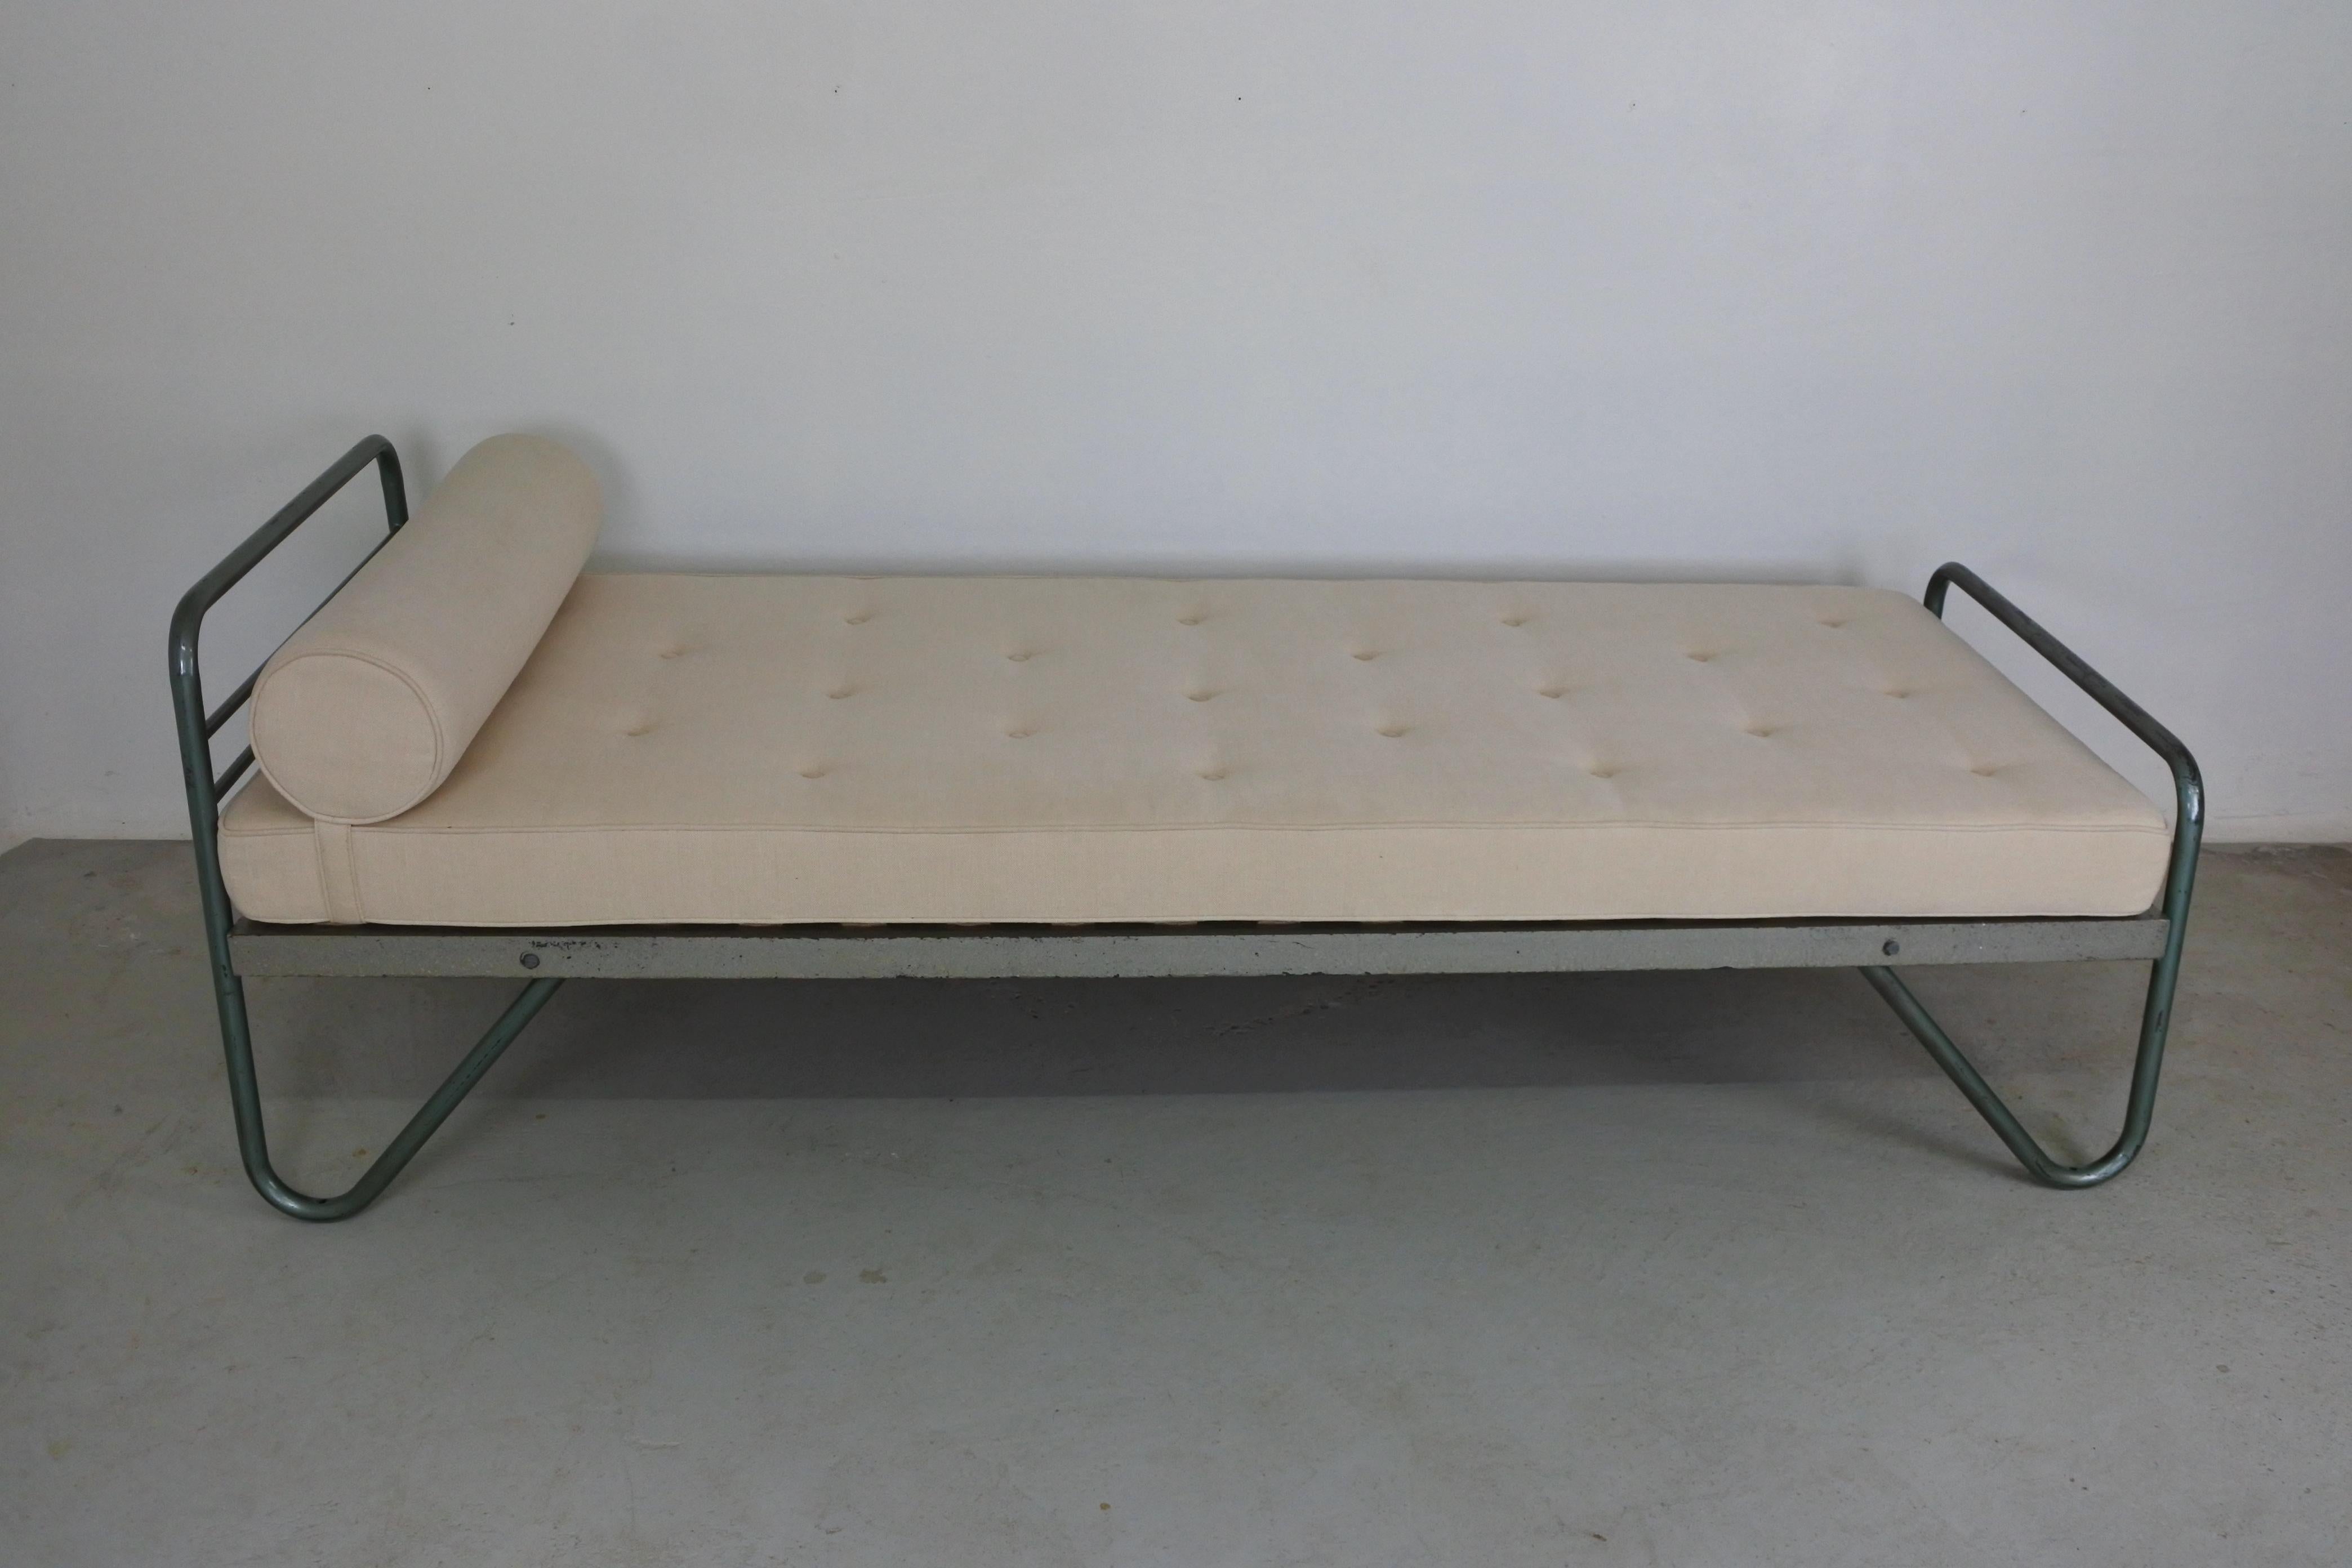 Mid-Century Modern daybed attributed to Jacques Hitier
Tubular lacquered steel with new upholstery
Made in France in the 1950s

Fantastic natural patina from age and use to the tubular steel.